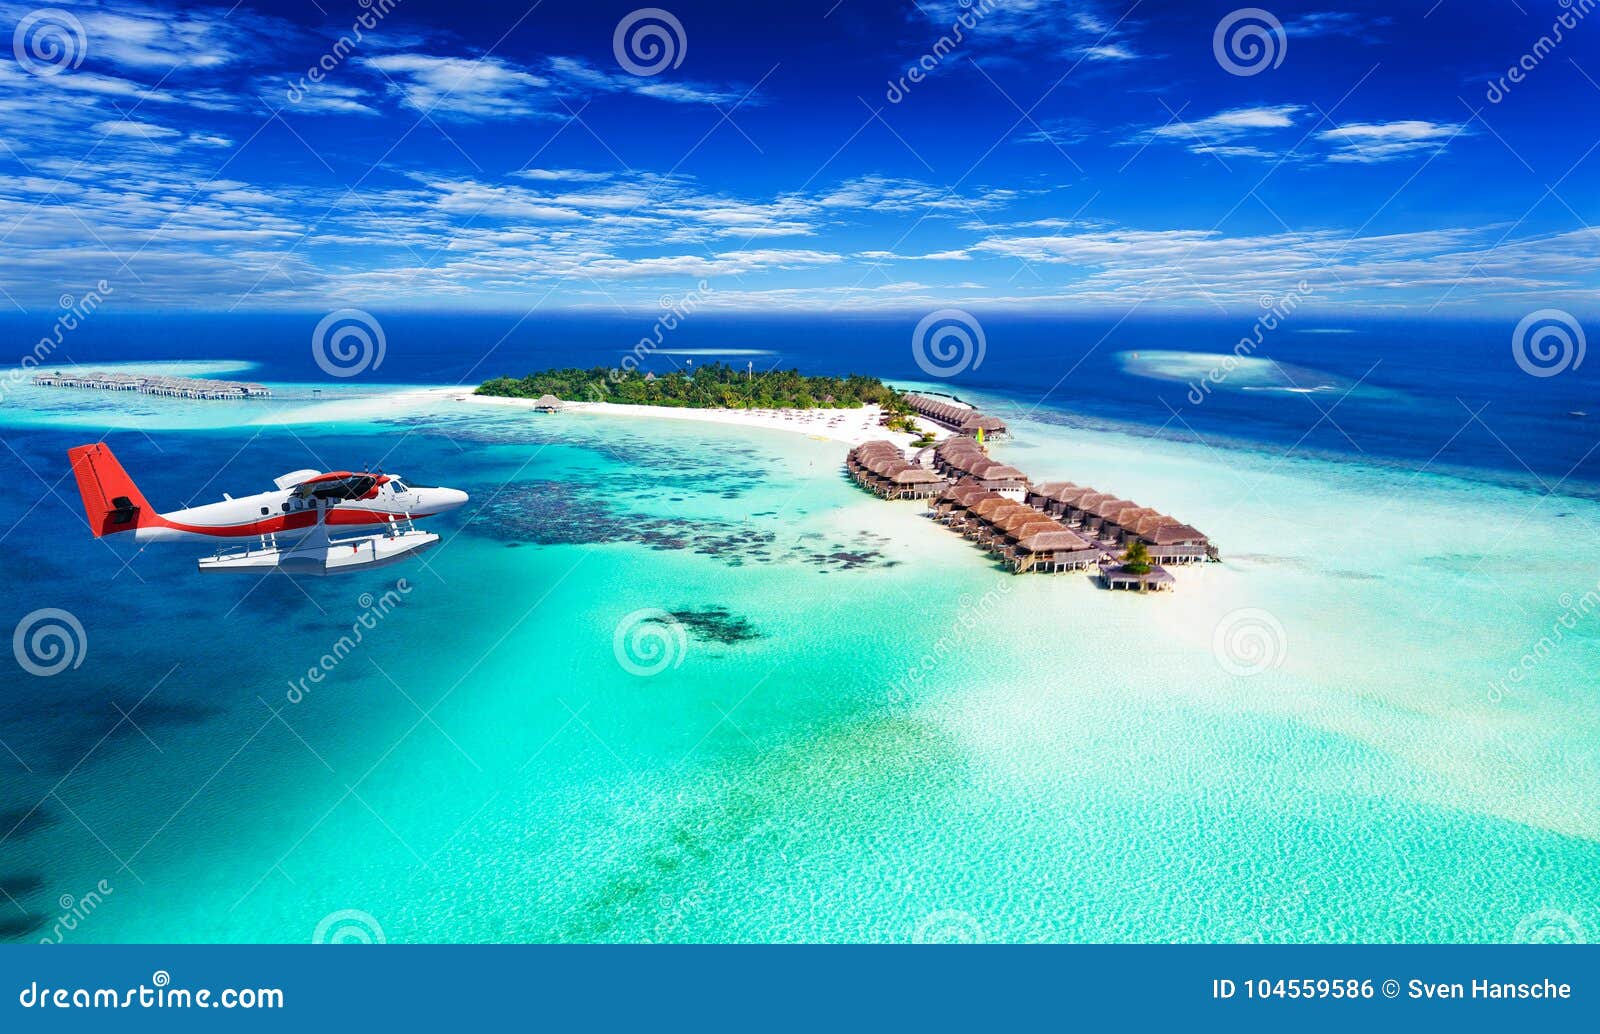 a seaplane approaching island in the maldives